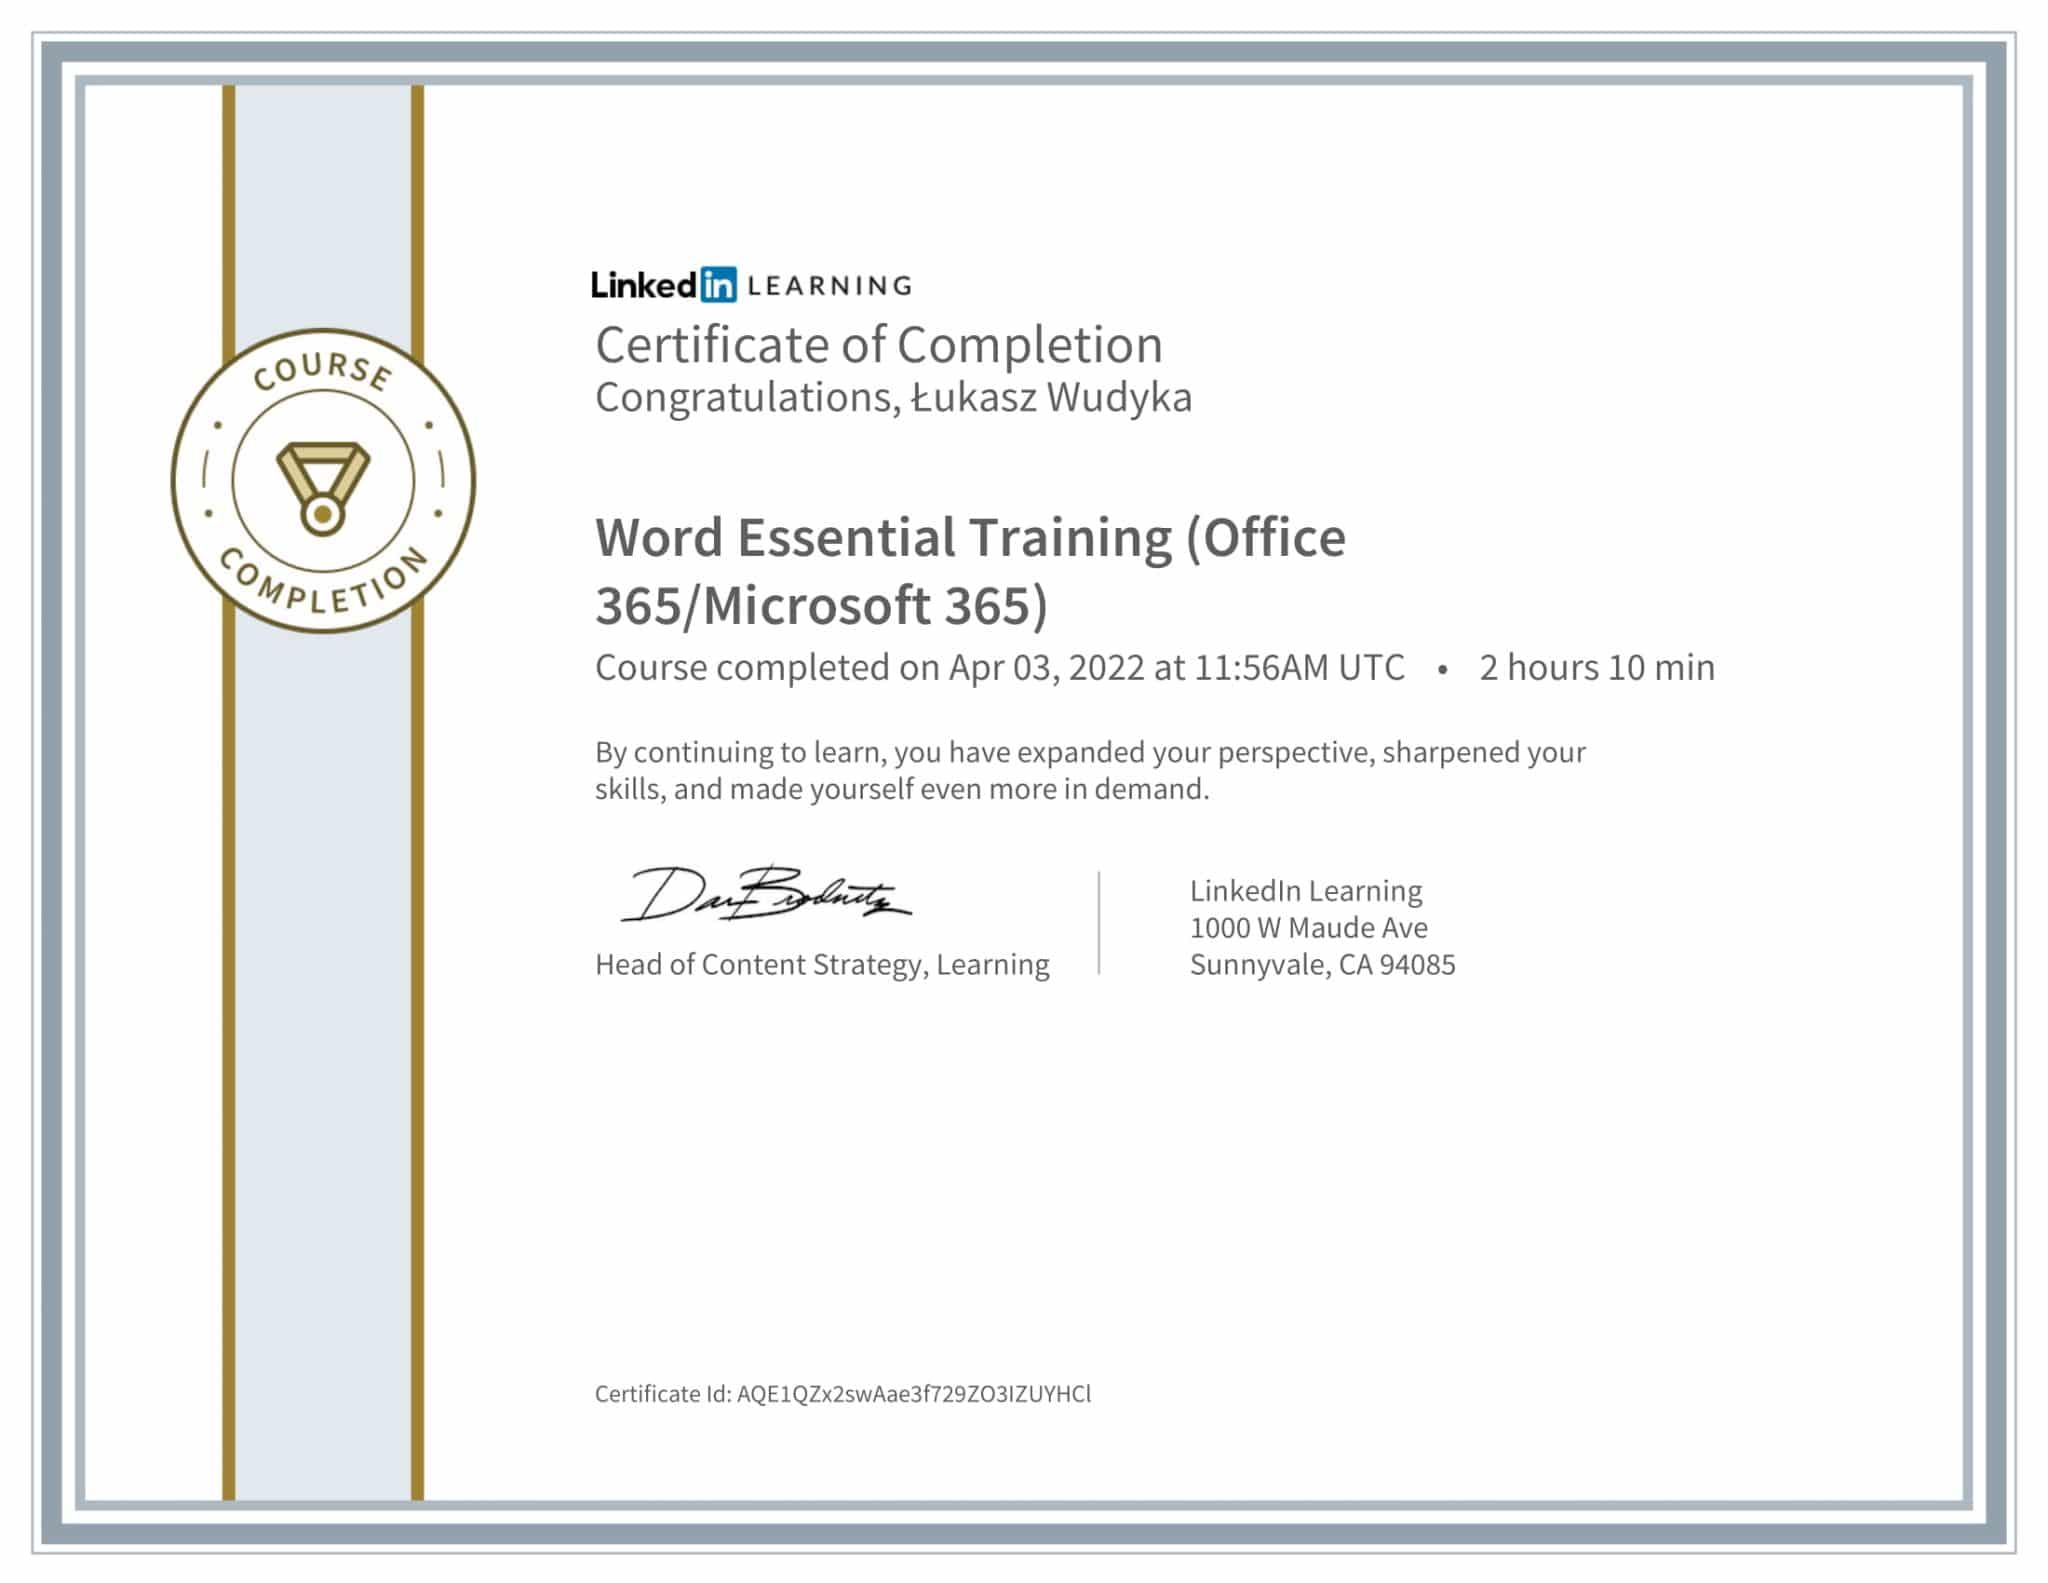 CertificateOfCompletion_Word Essential Training Office 365Microsoft 365-1